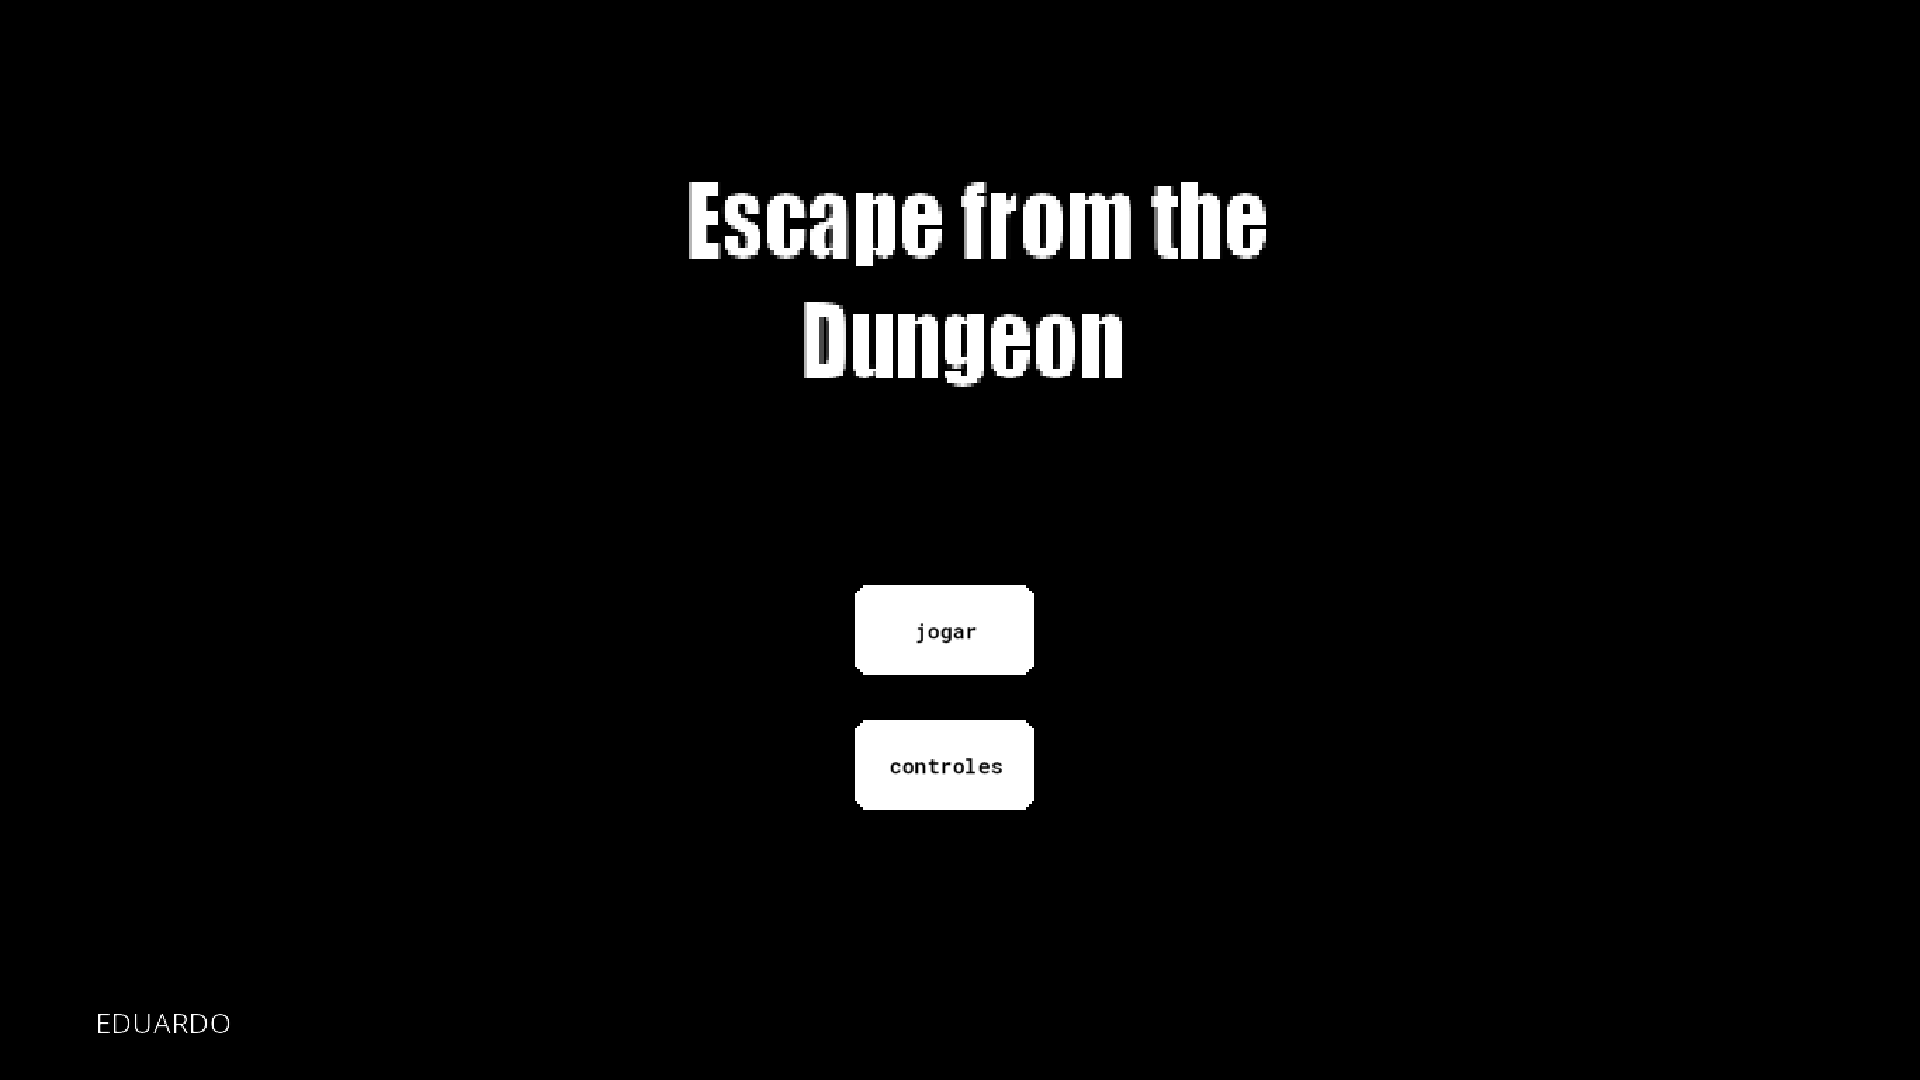 Escape from the dungeon